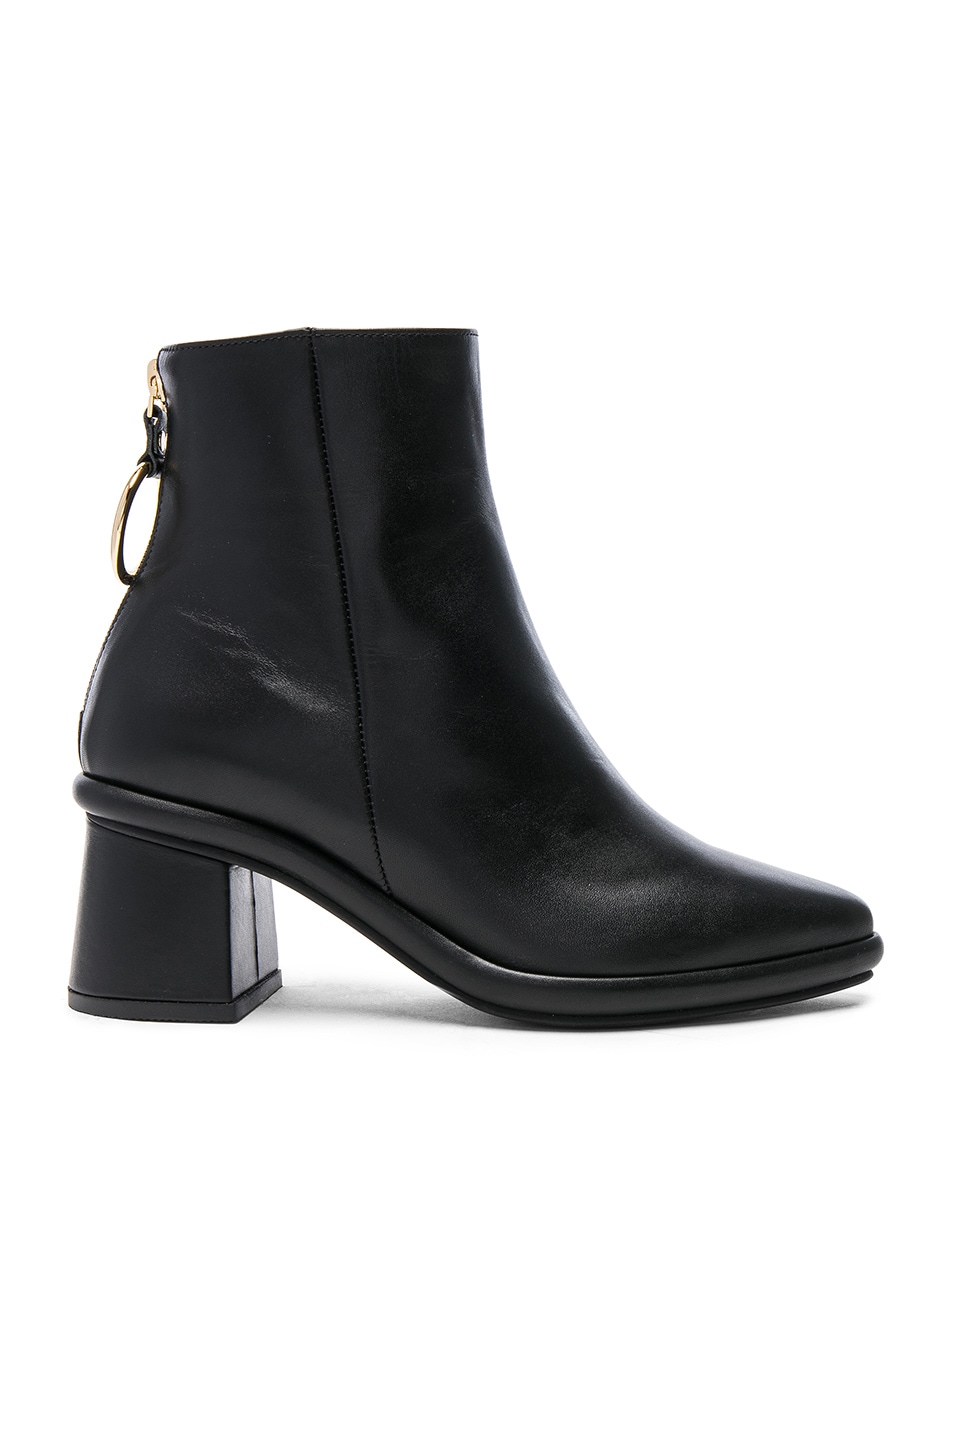 Image 1 of Reike Nen Leather Ring Slim Boots in Black